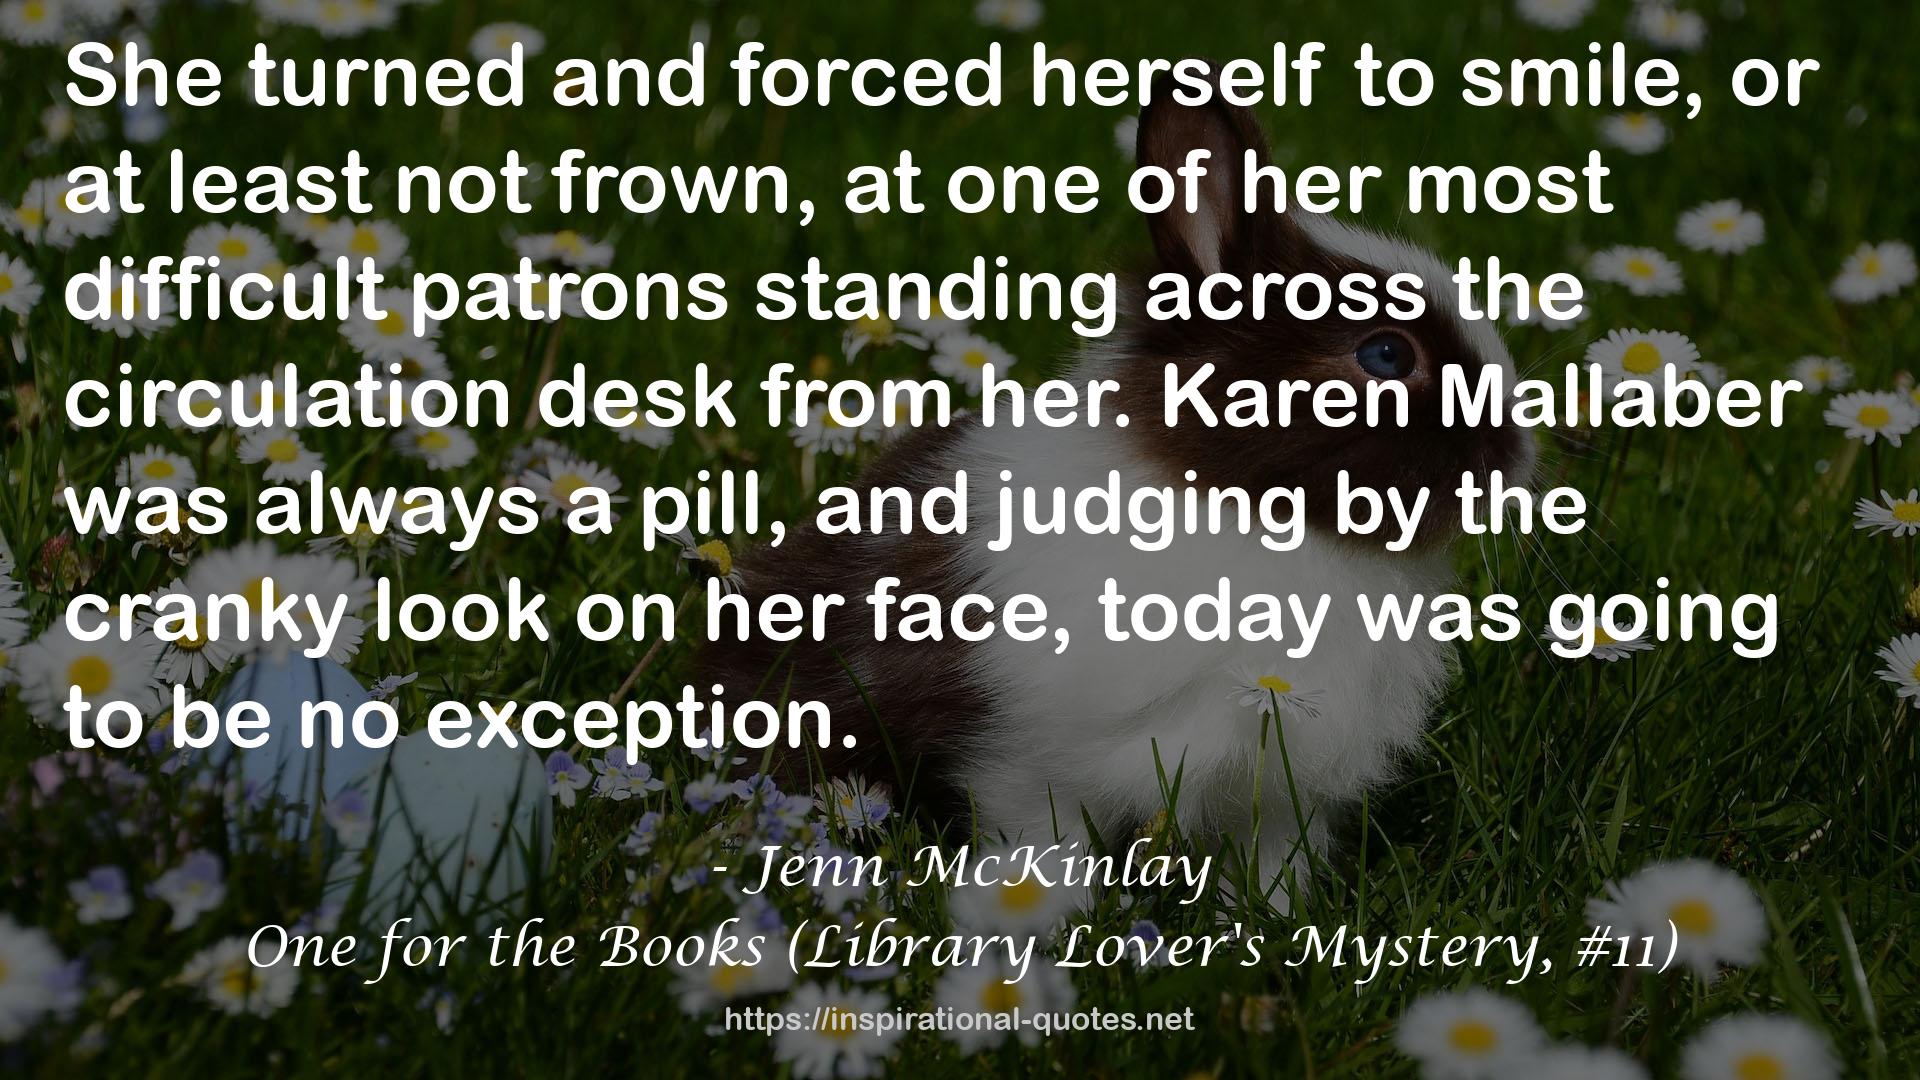 One for the Books (Library Lover's Mystery, #11) QUOTES